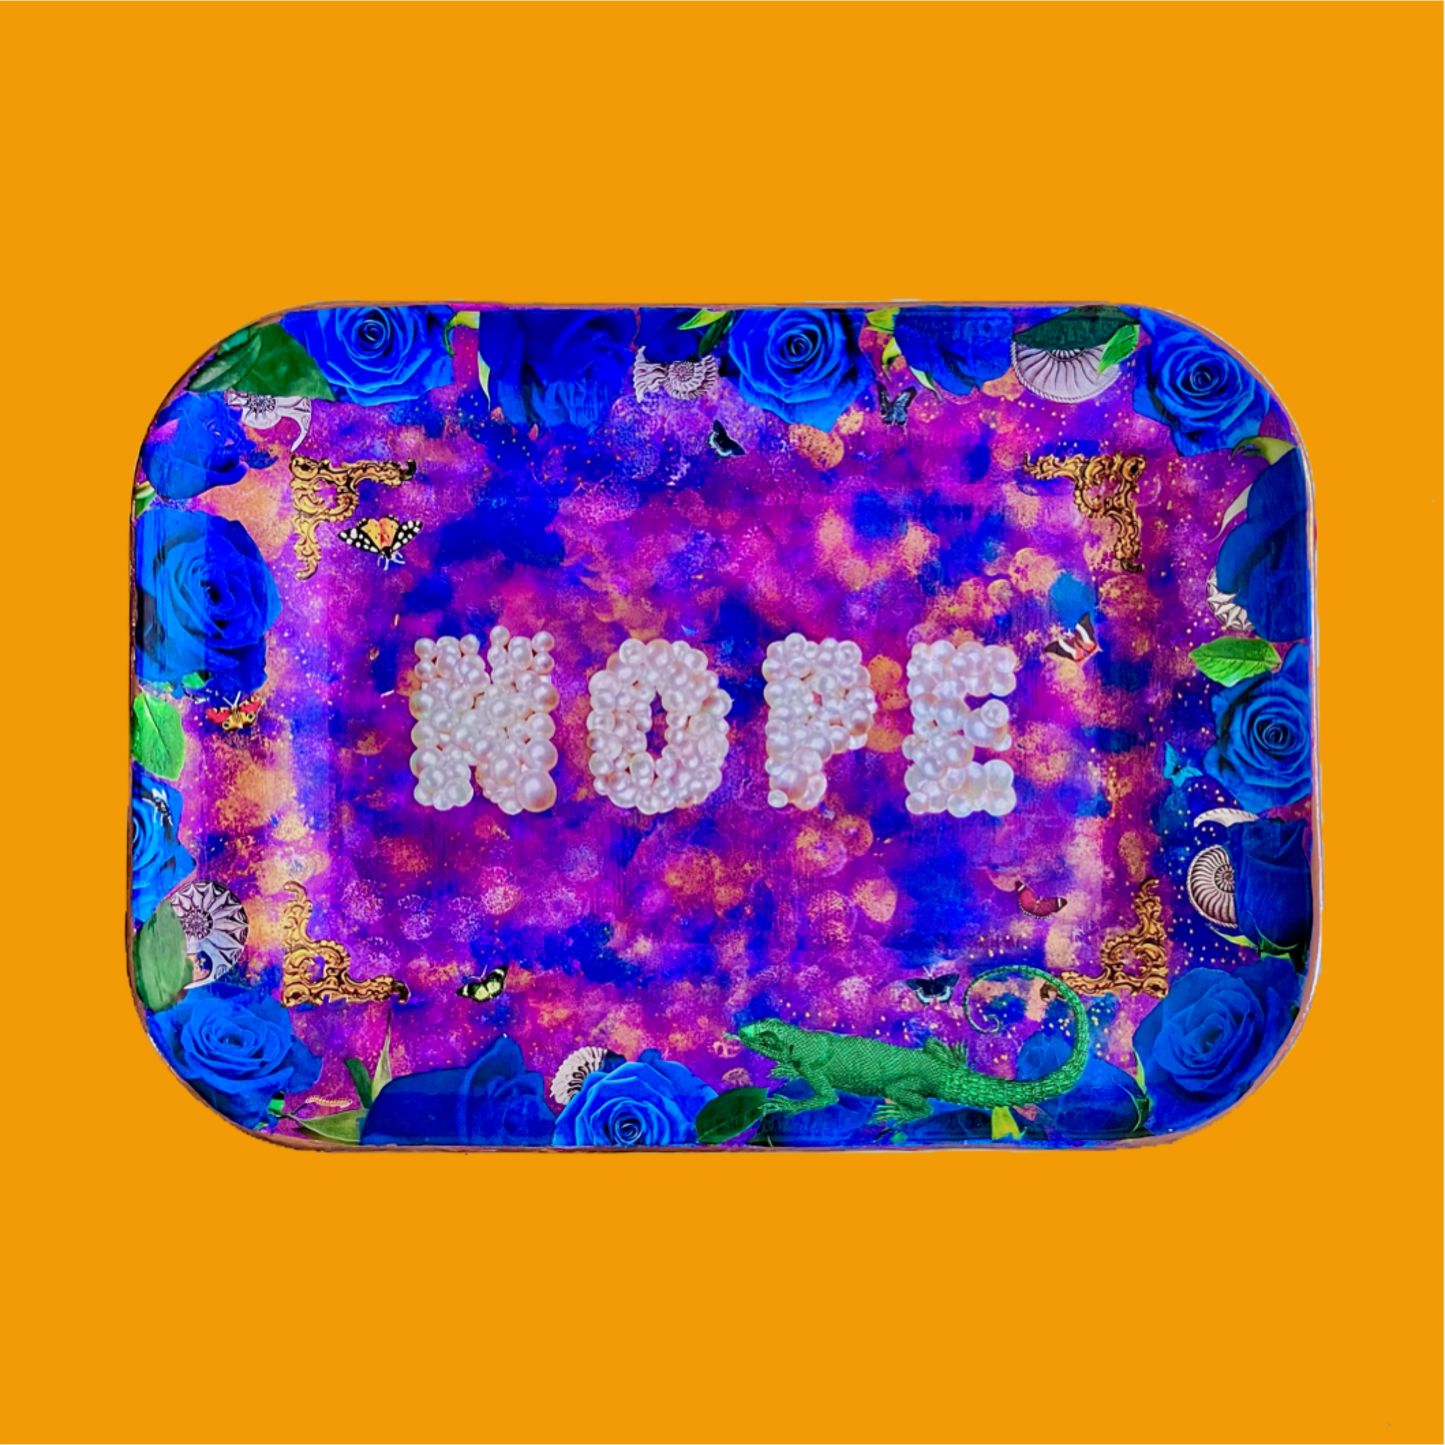 "Nope" Wall Plate by House of Frisson. Featuring the word "nope" written with pearls, framed by blue roses, shells, moths, and a lizard, on a  purple, blue and golden background.